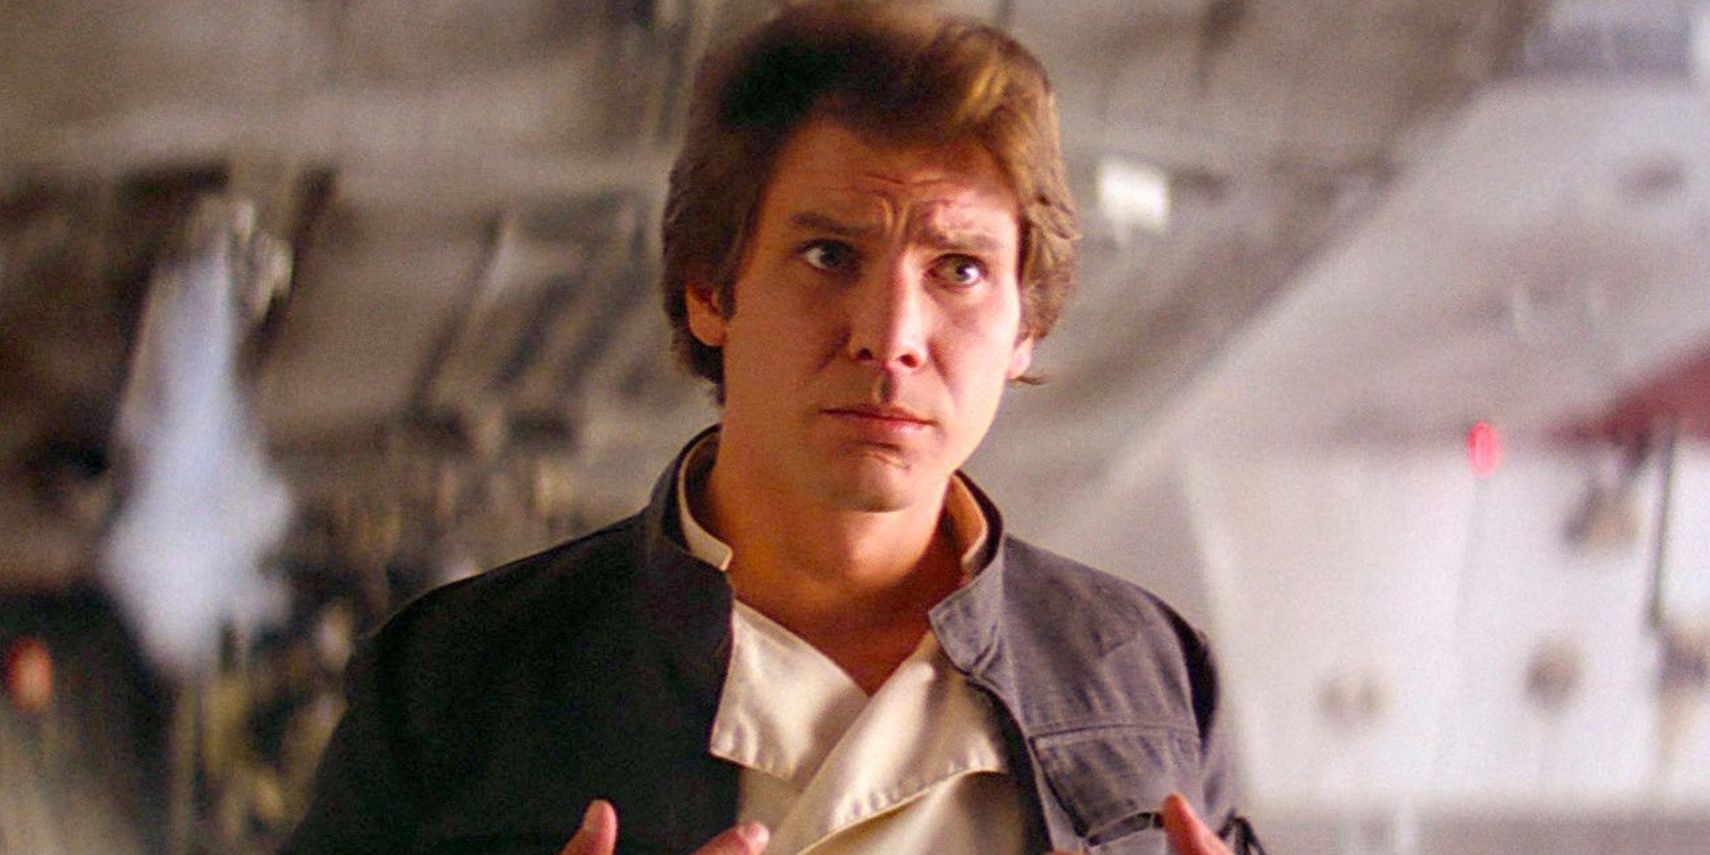 Han Solo refers to himself in Star Wars 5